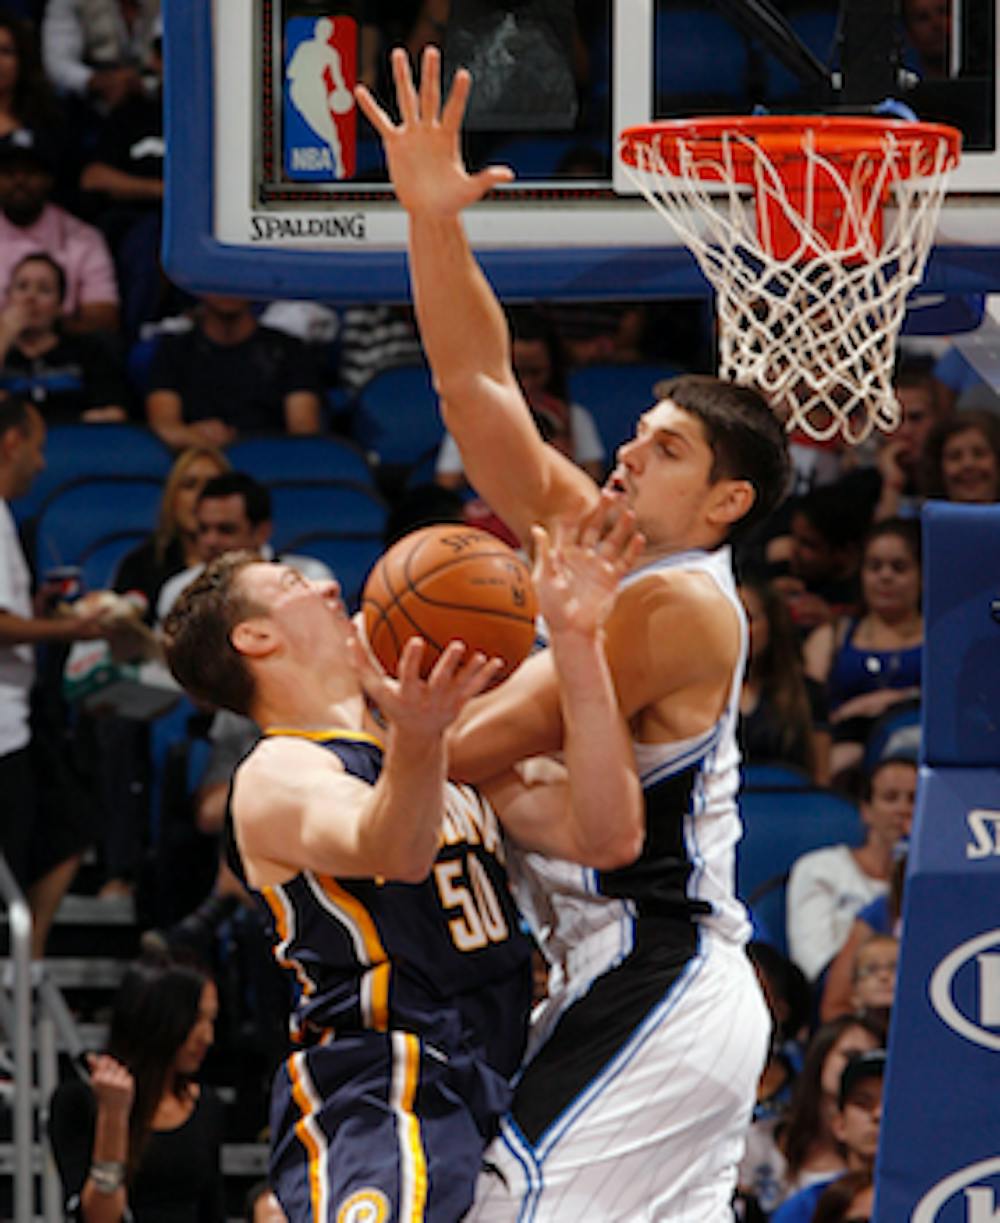 MCT PHOTO Orlando Magic forward Nikola Vucevic fouls Indiana Pacers forward Tyler Hansbrough in the paint during the second half of preseason action Oct. 19 at the Amway Center in Orlando, Fla. Indiana defeated Toronto 90-88 on Wednesday. 